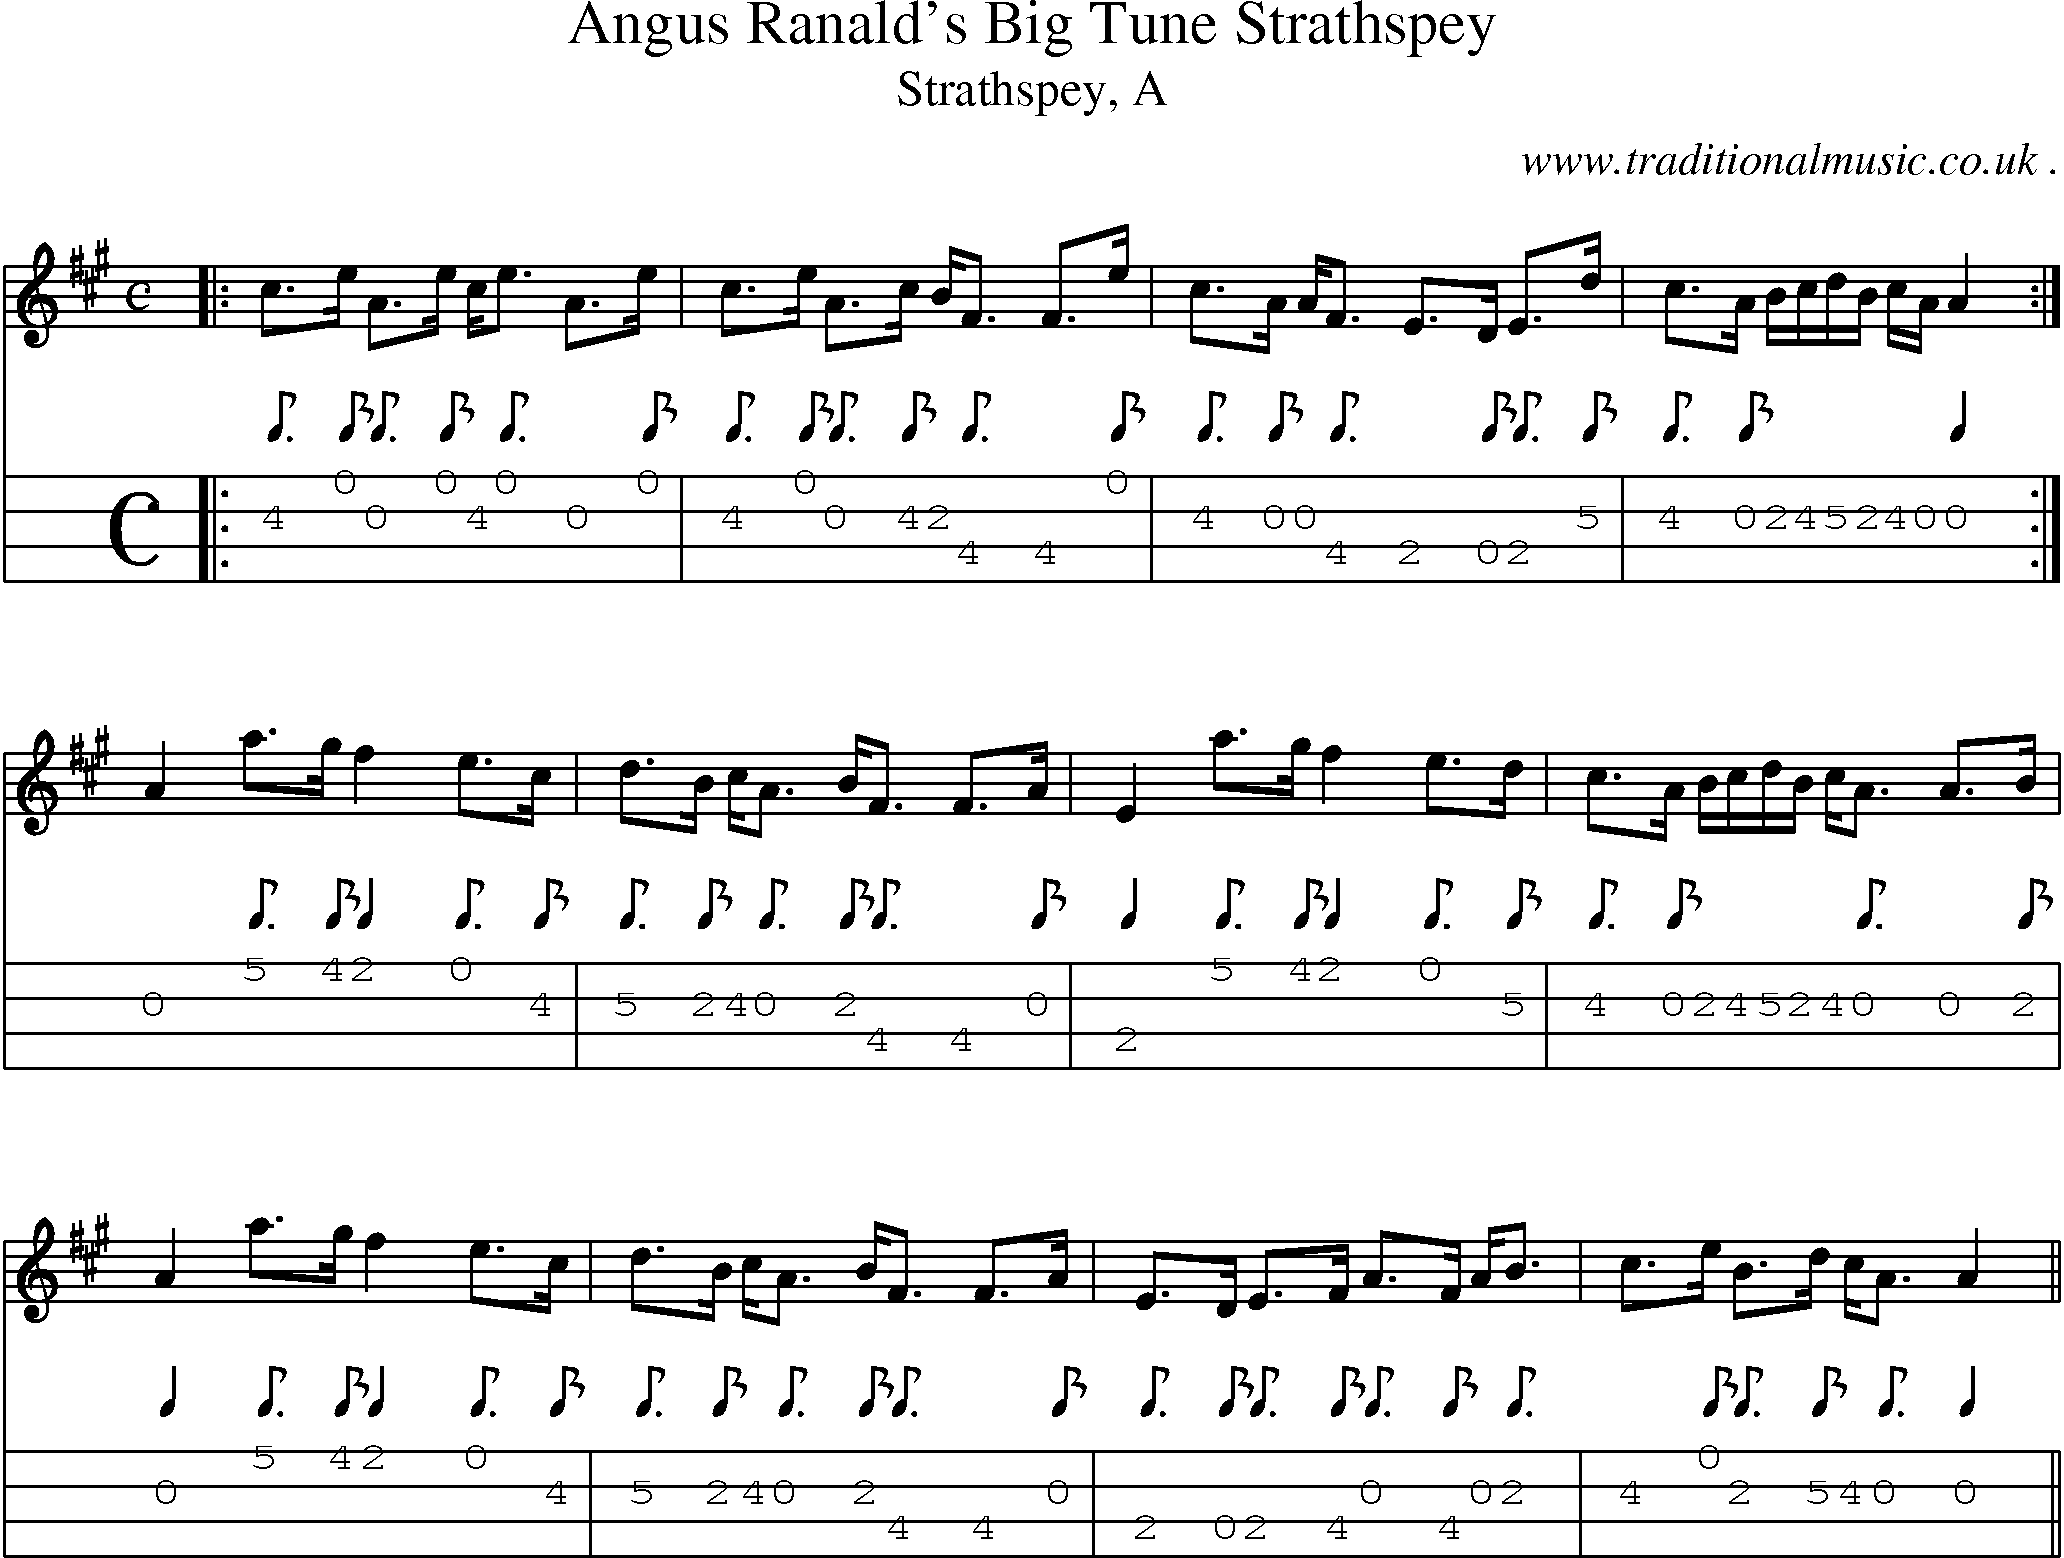 Sheet-music  score, Chords and Mandolin Tabs for Angus Ranalds Big Tune Strathspey